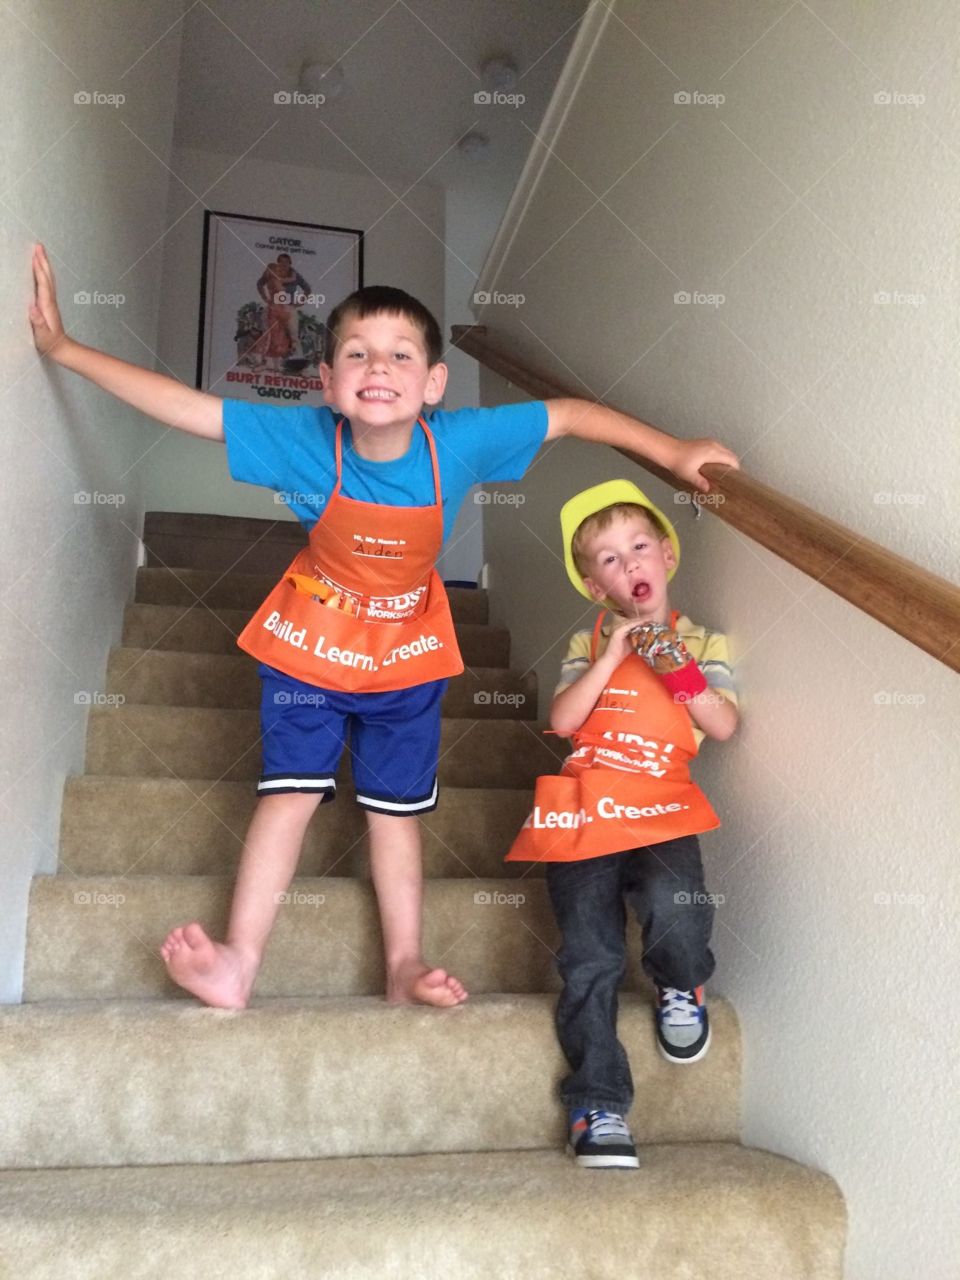 Home Depot costumes